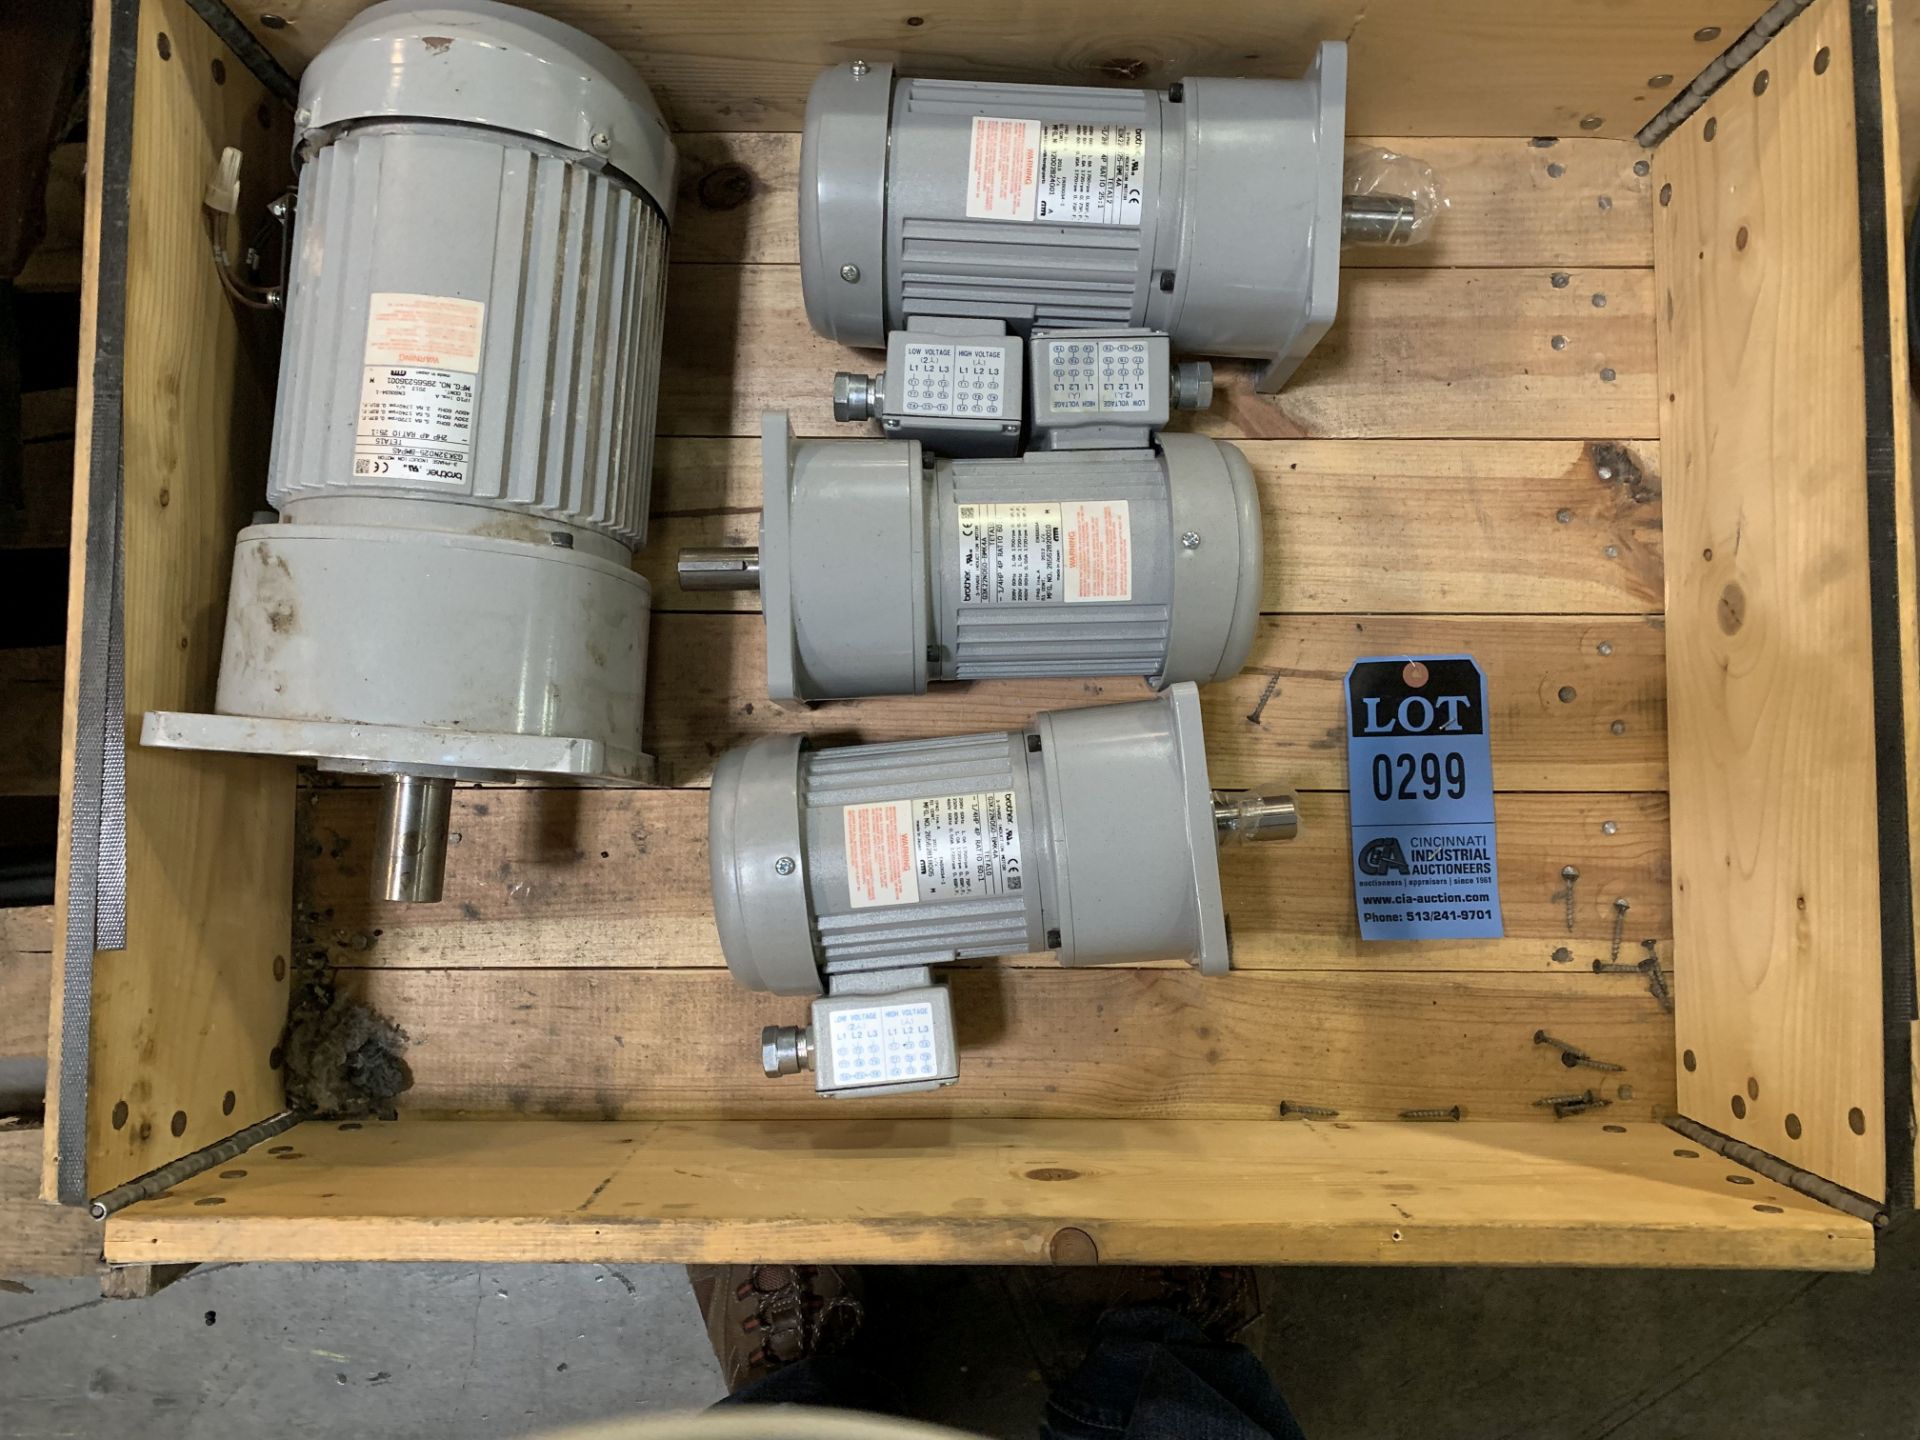 (LOT) (3) 1/4 HP AND (1) 2 HP ELECTRIC ELECTRIC MOTORS IN BOX - NEW **LOCATED AT 1711 KIMBERLY